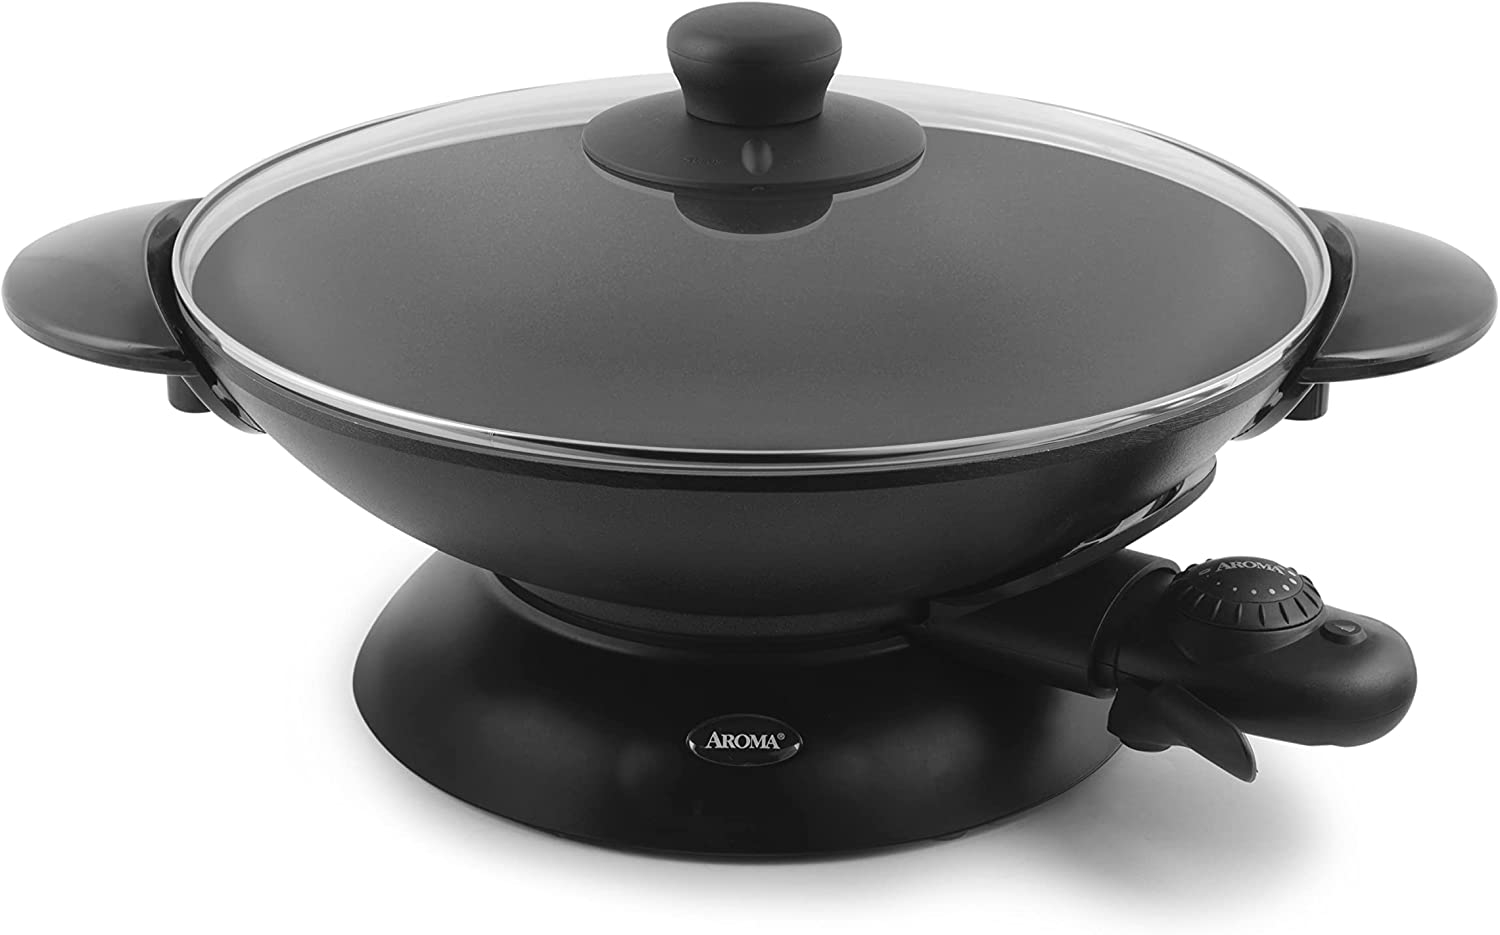 Aroma Housewares AEW-306 Electric Wok with Tempered Glass Lid Easy Clean Nonstick, Cooking Chopsticks, Tempura and Steaming